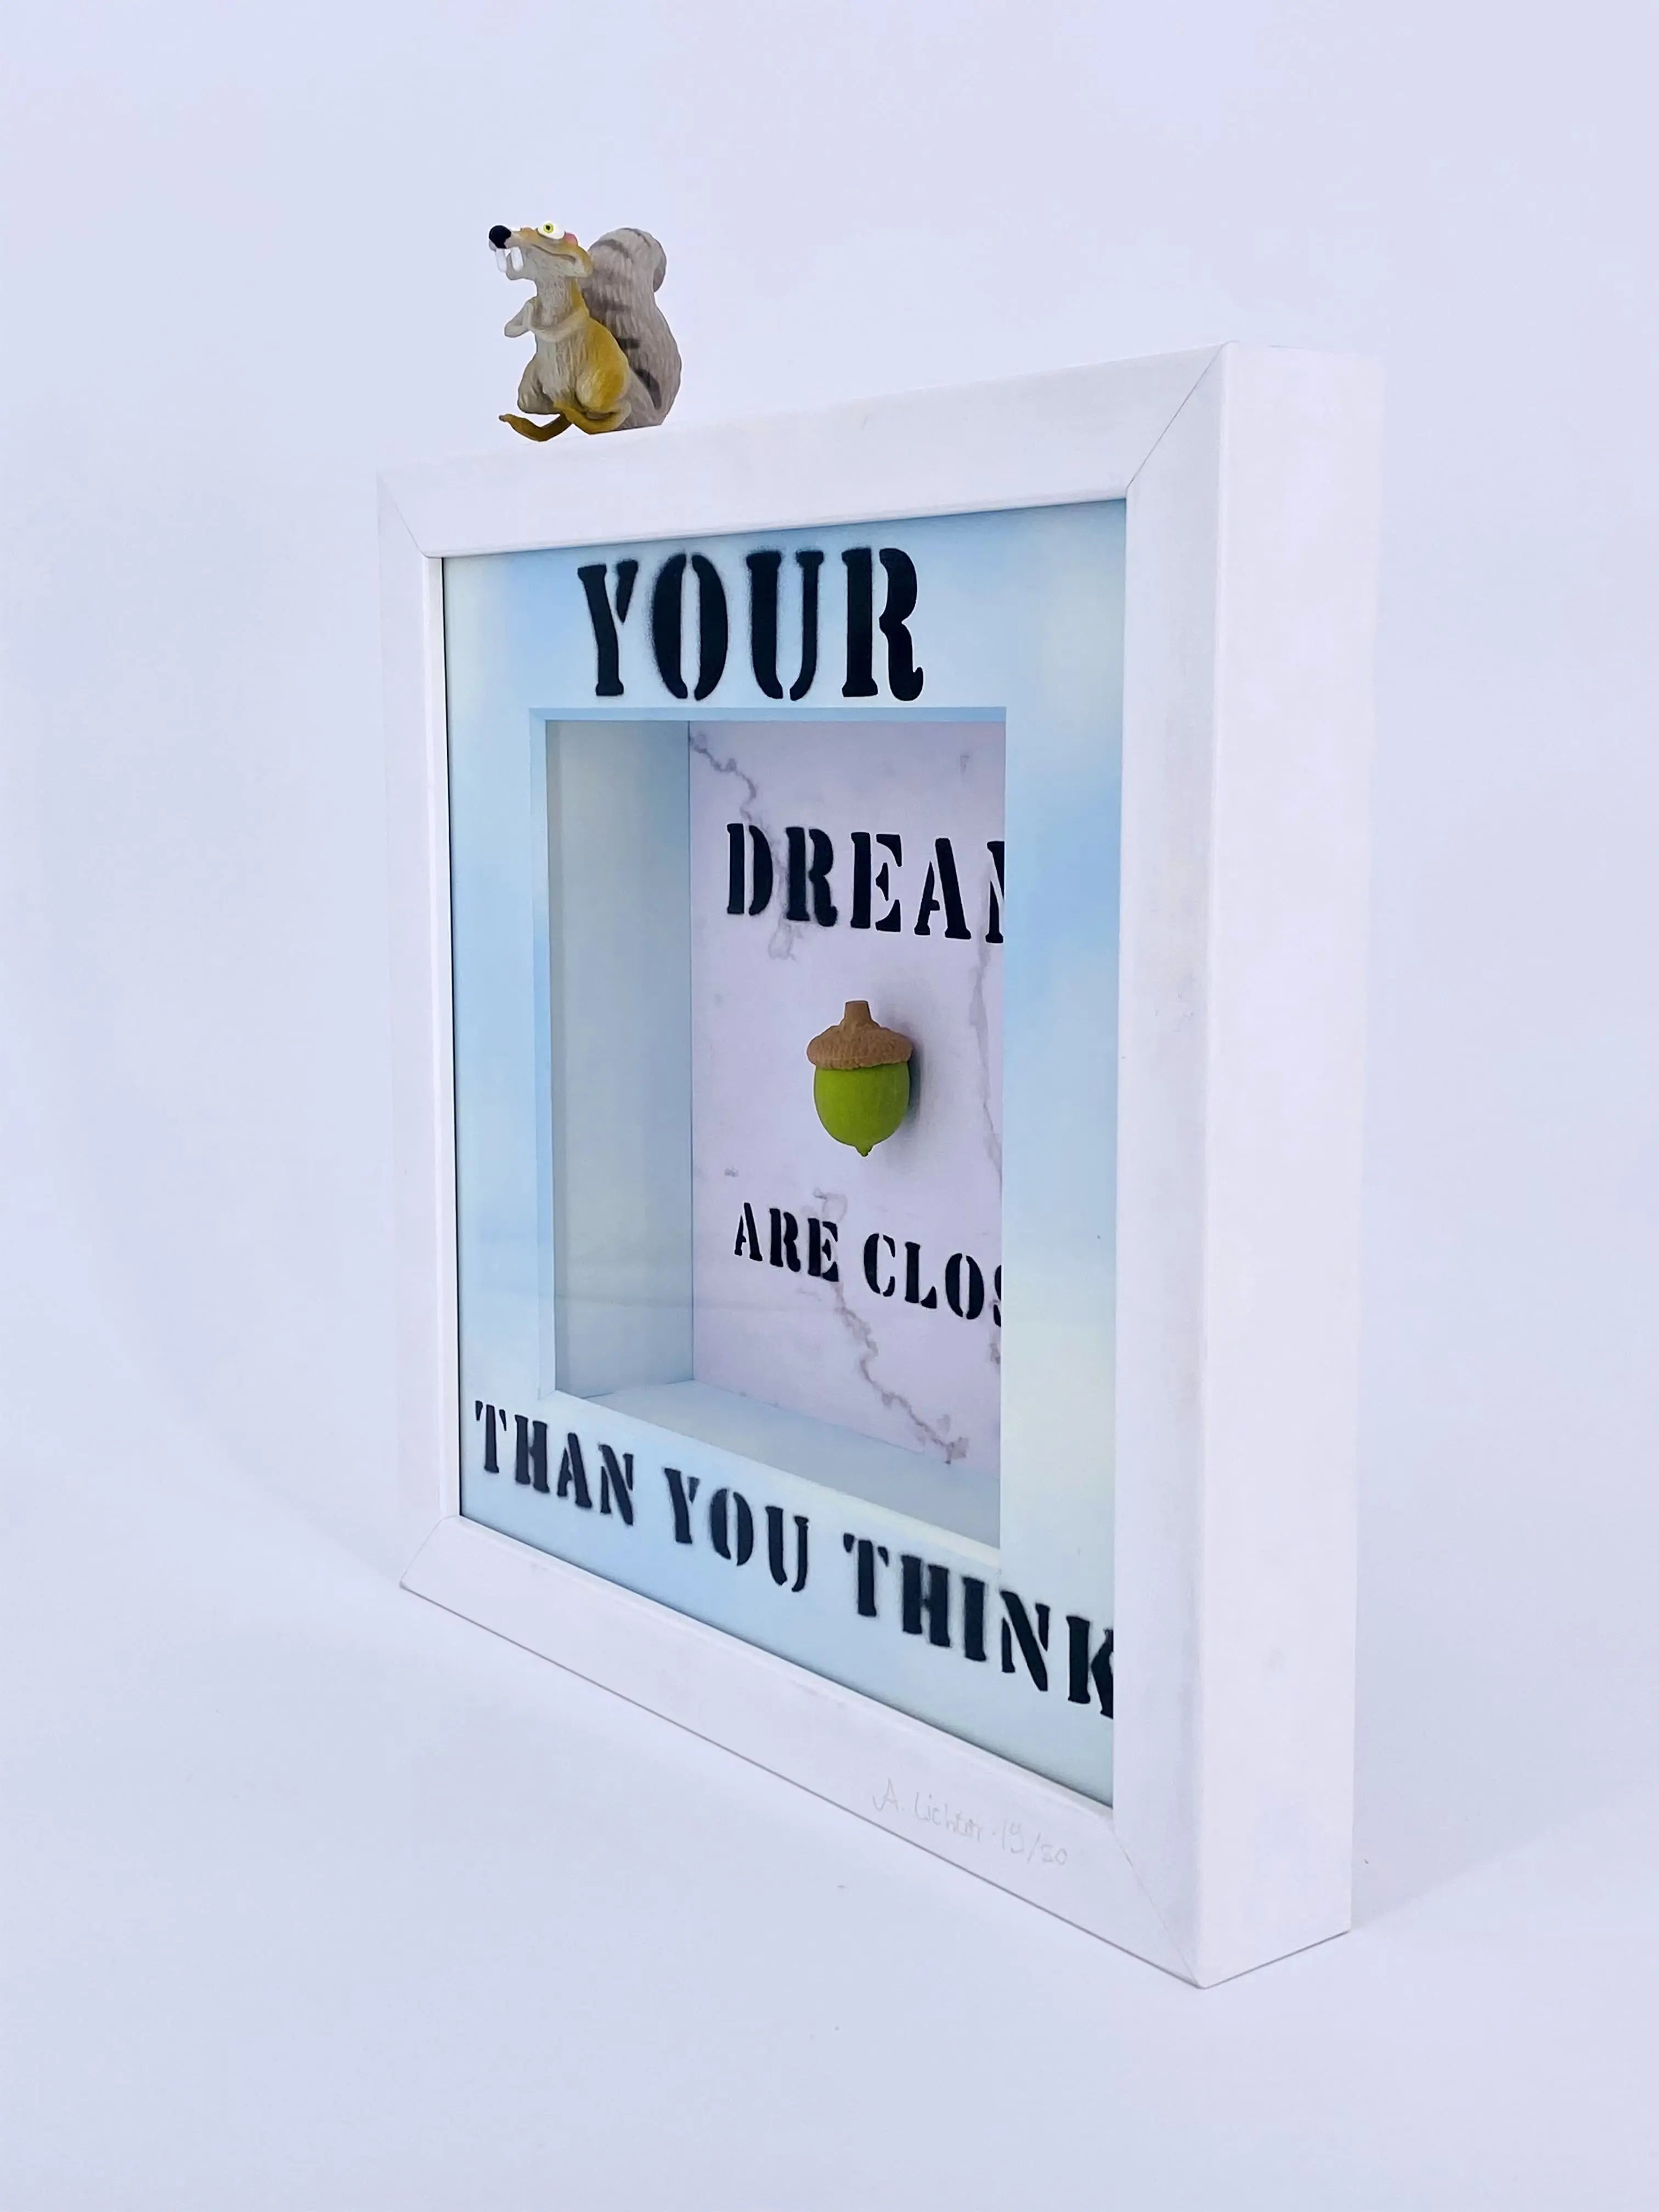 Andreas Lichter - Your Dreams are closer than you think - Galerie Vogel